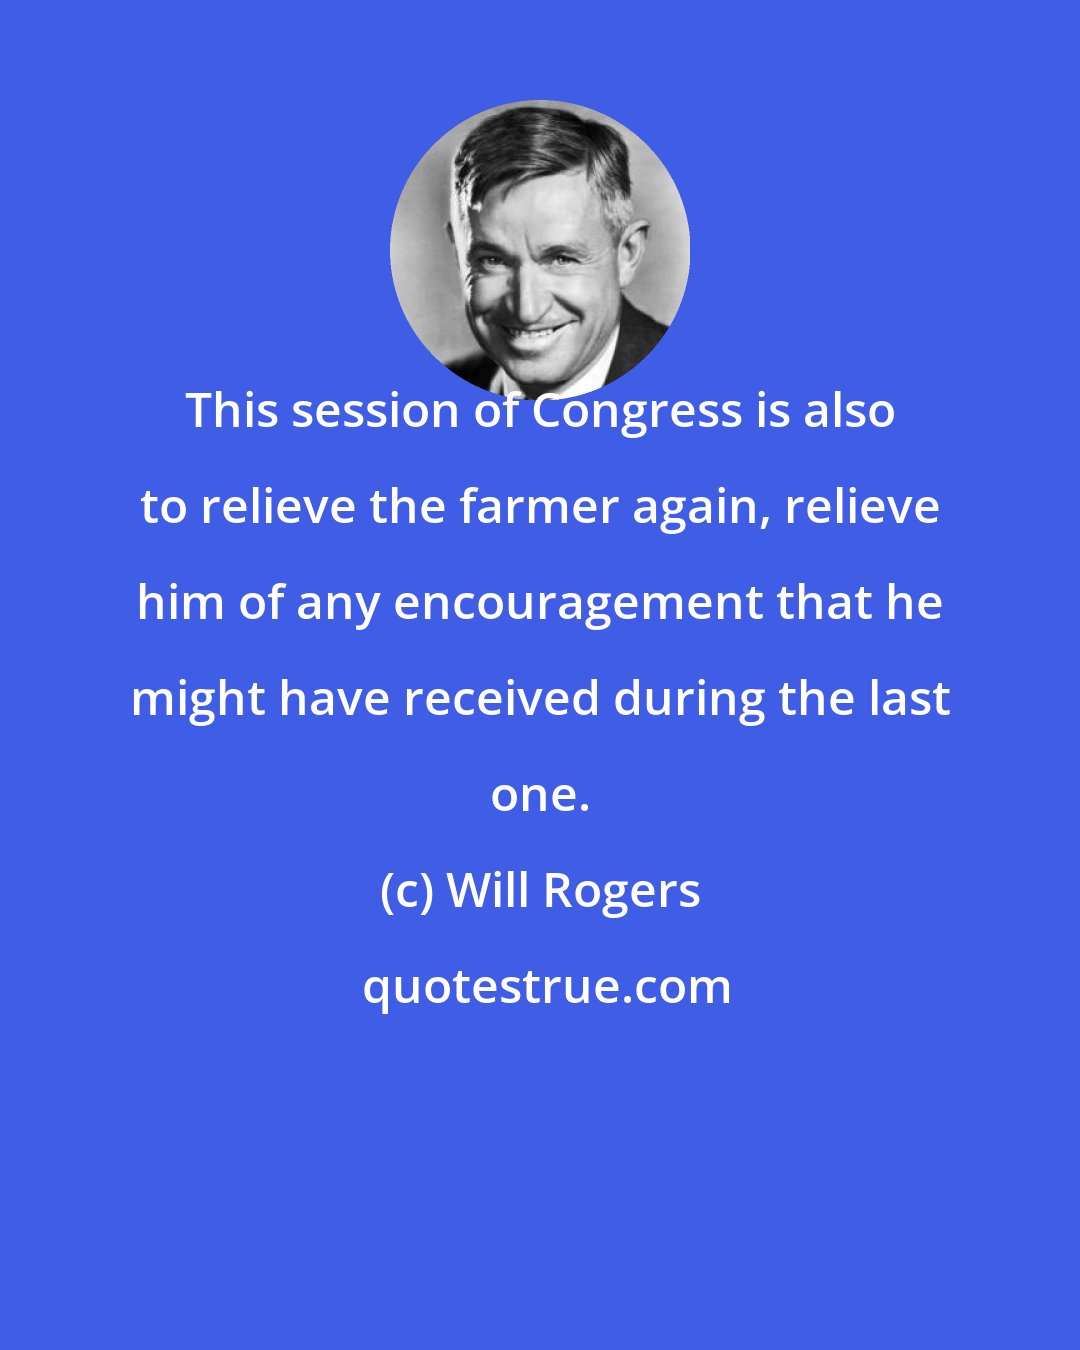 Will Rogers: This session of Congress is also to relieve the farmer again, relieve him of any encouragement that he might have received during the last one.